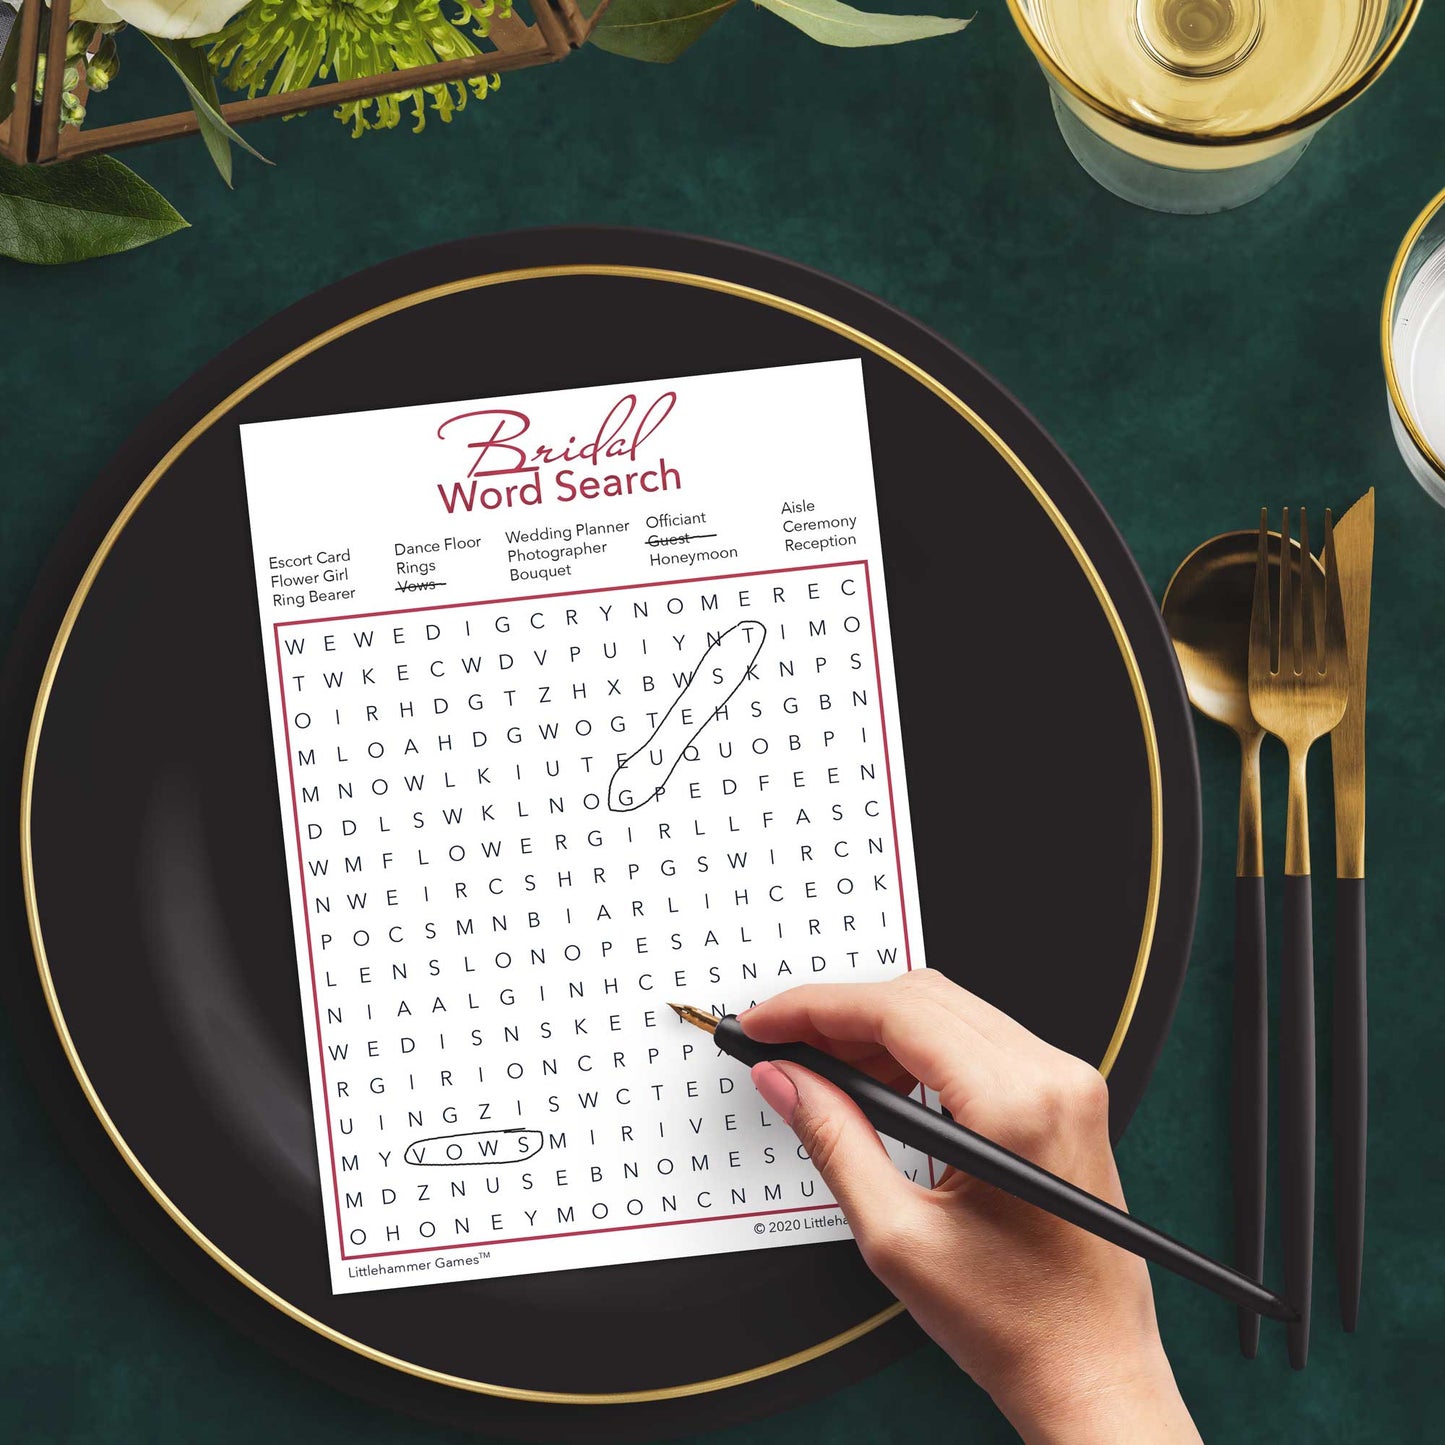 Woman with a pen playing a rose gold and white Bridal Word Search game card at a dark place setting